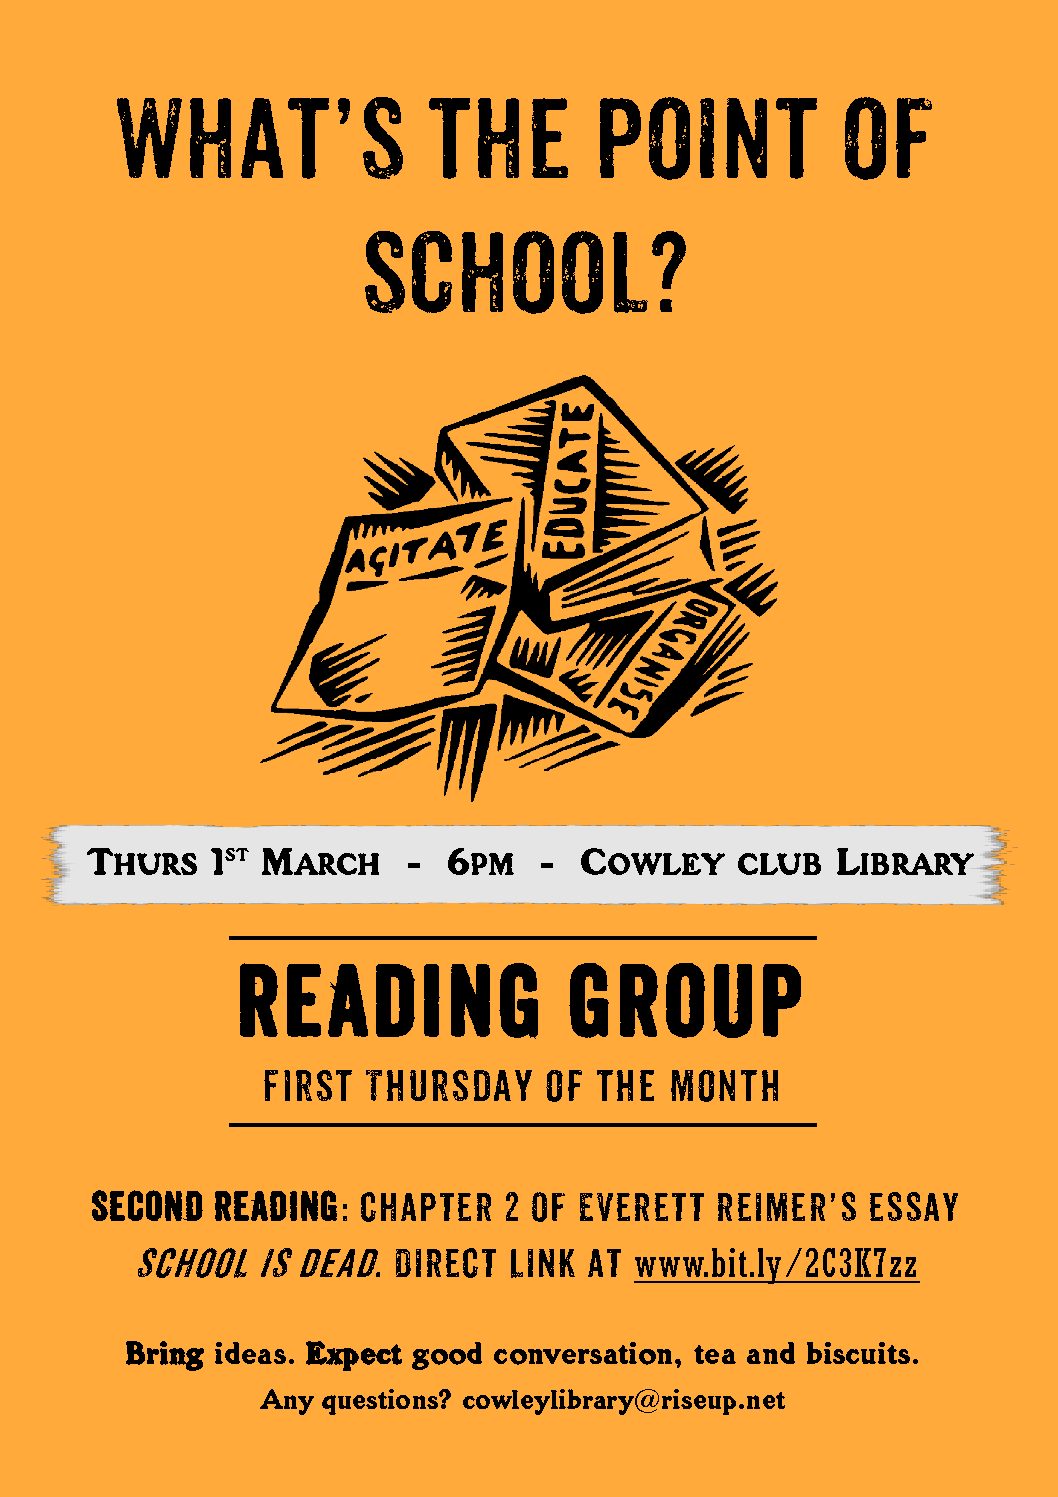 Cowley Club Reading Group – What’s the point of school?